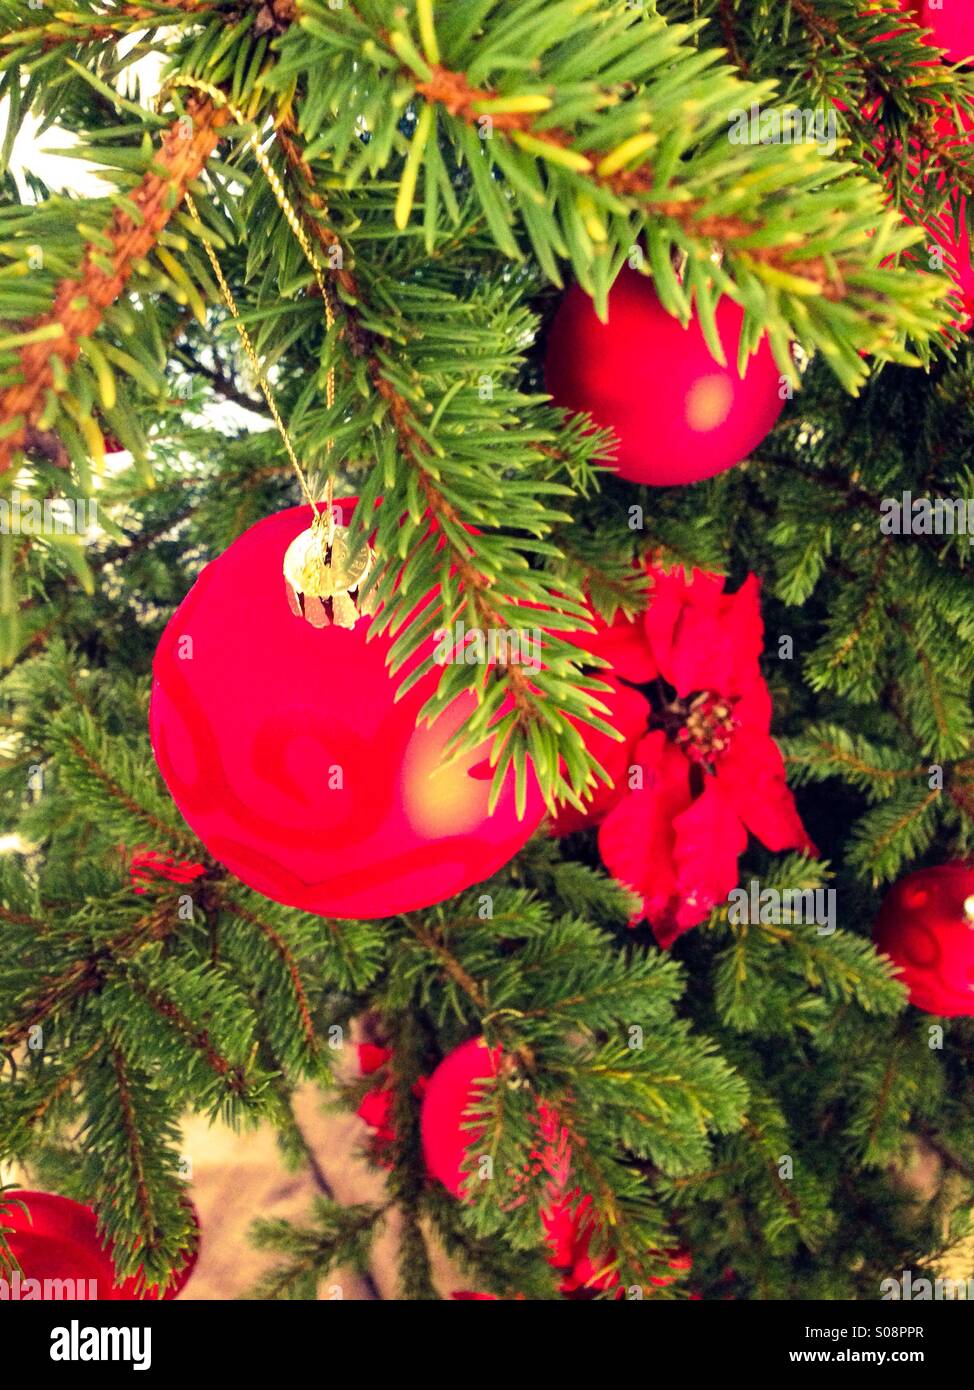 Christmas tree with red decoration Stock Photo